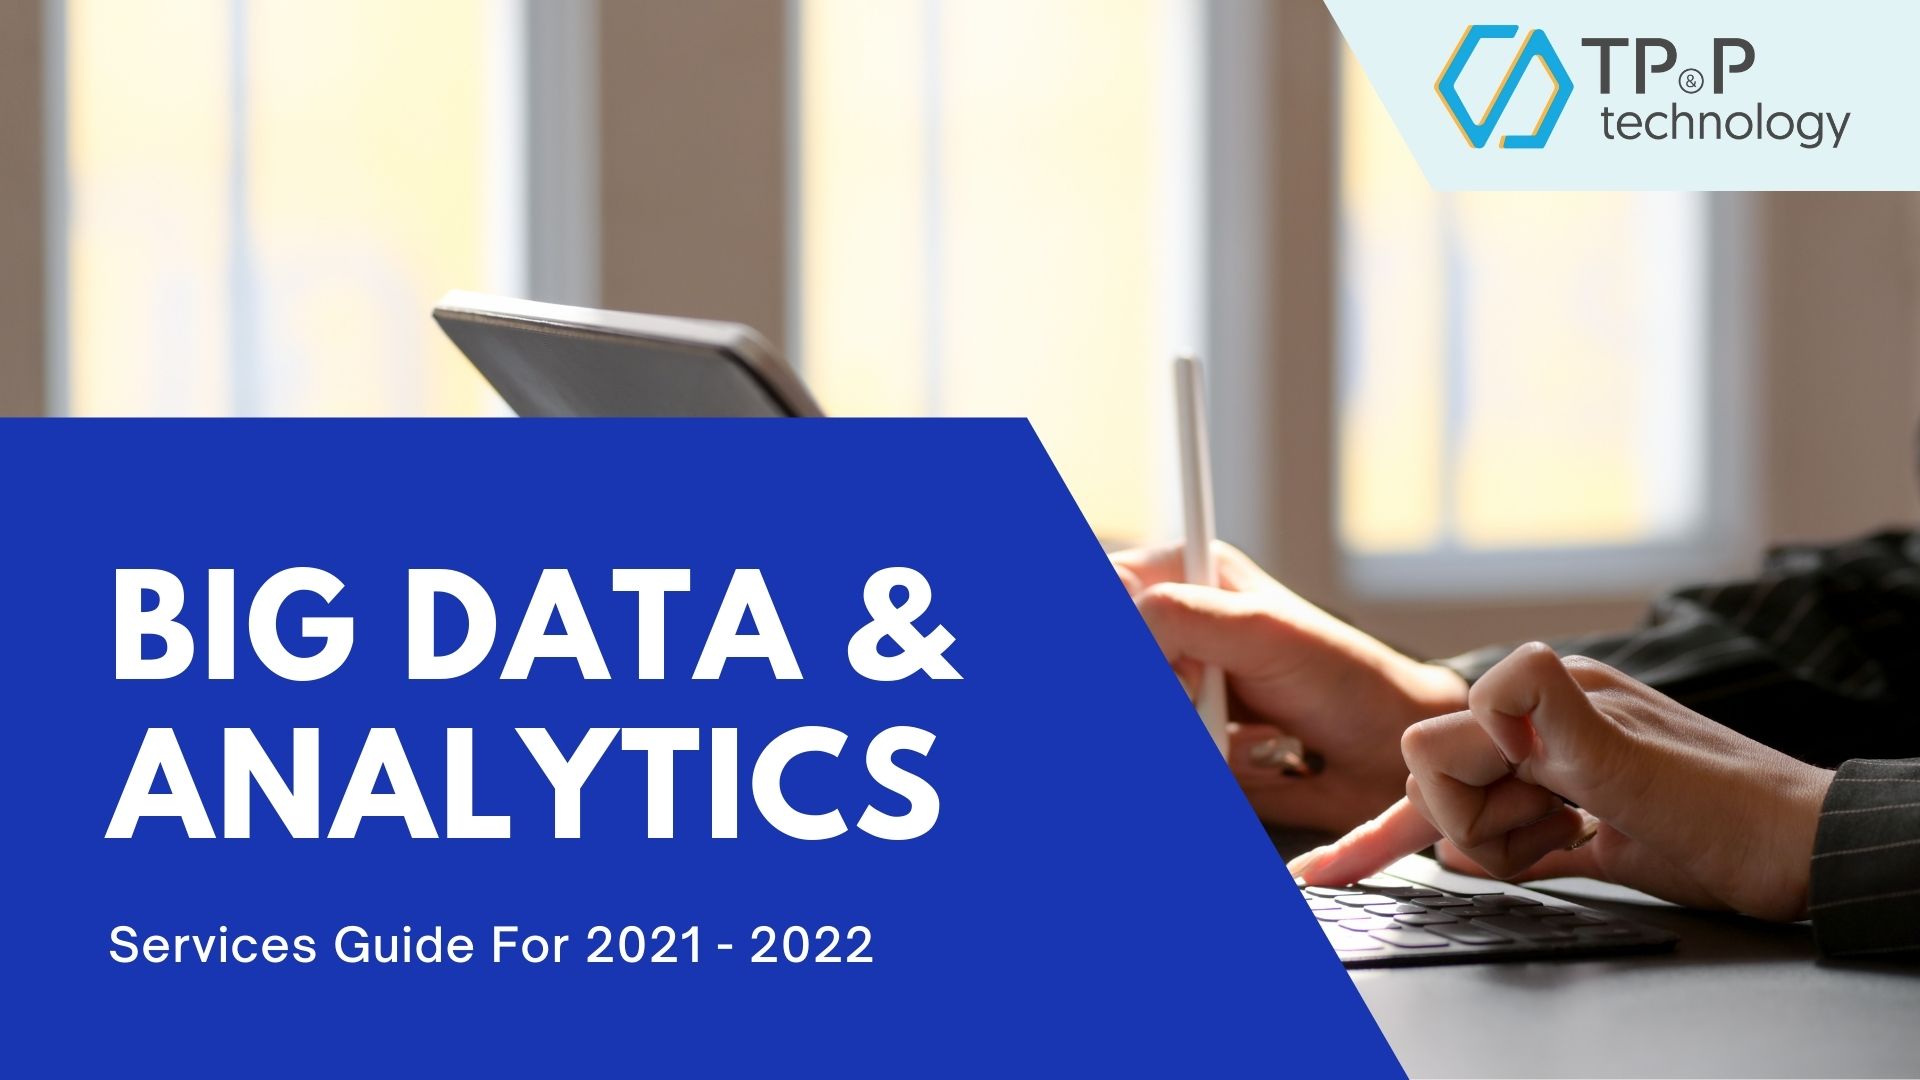 BIG DATA & ANALYTICS SERVICES GUIDE FOR 2021-2022